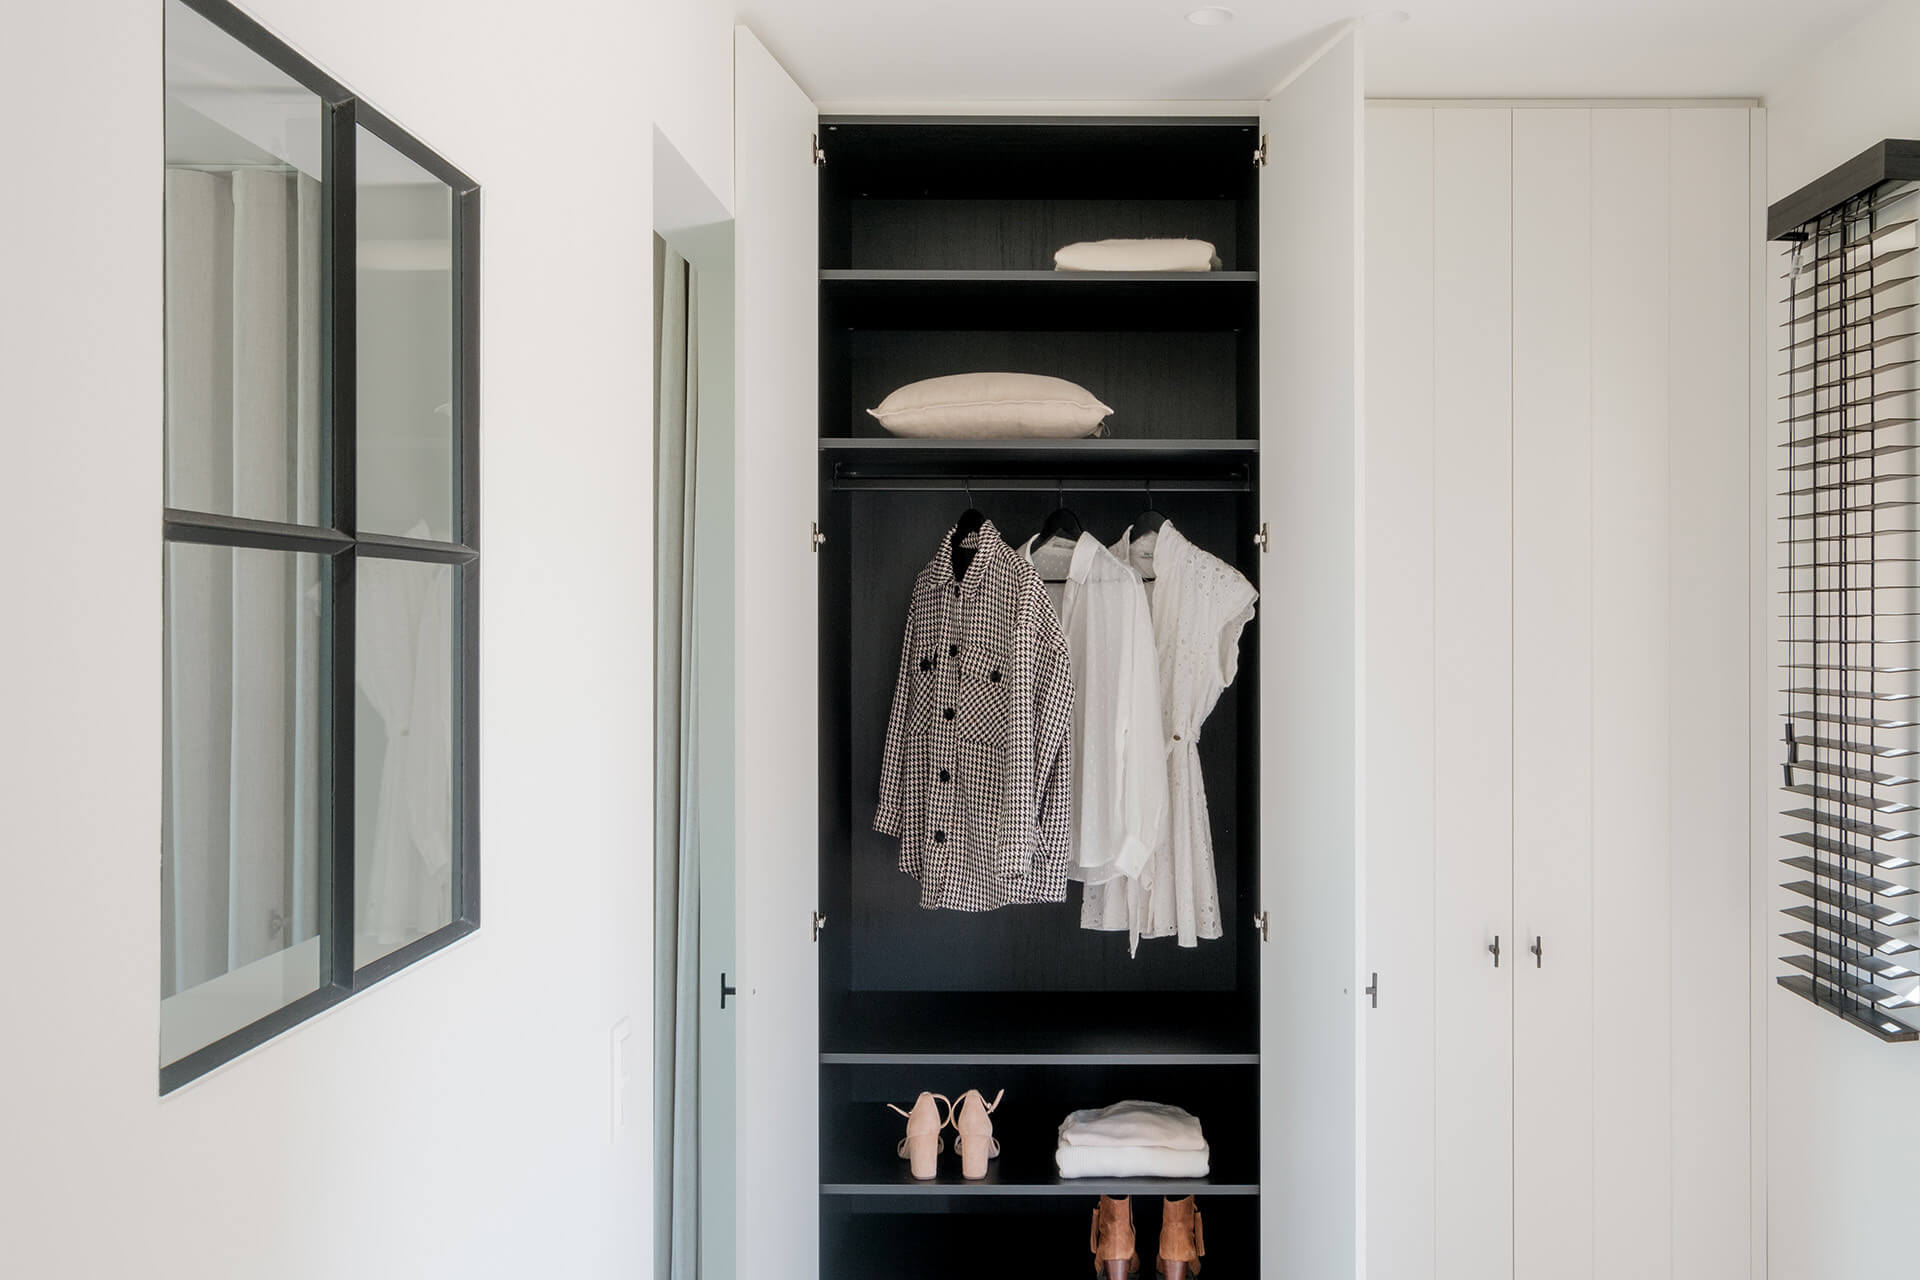 Bespoke wardrobe with doors in mdf with vertical grooves